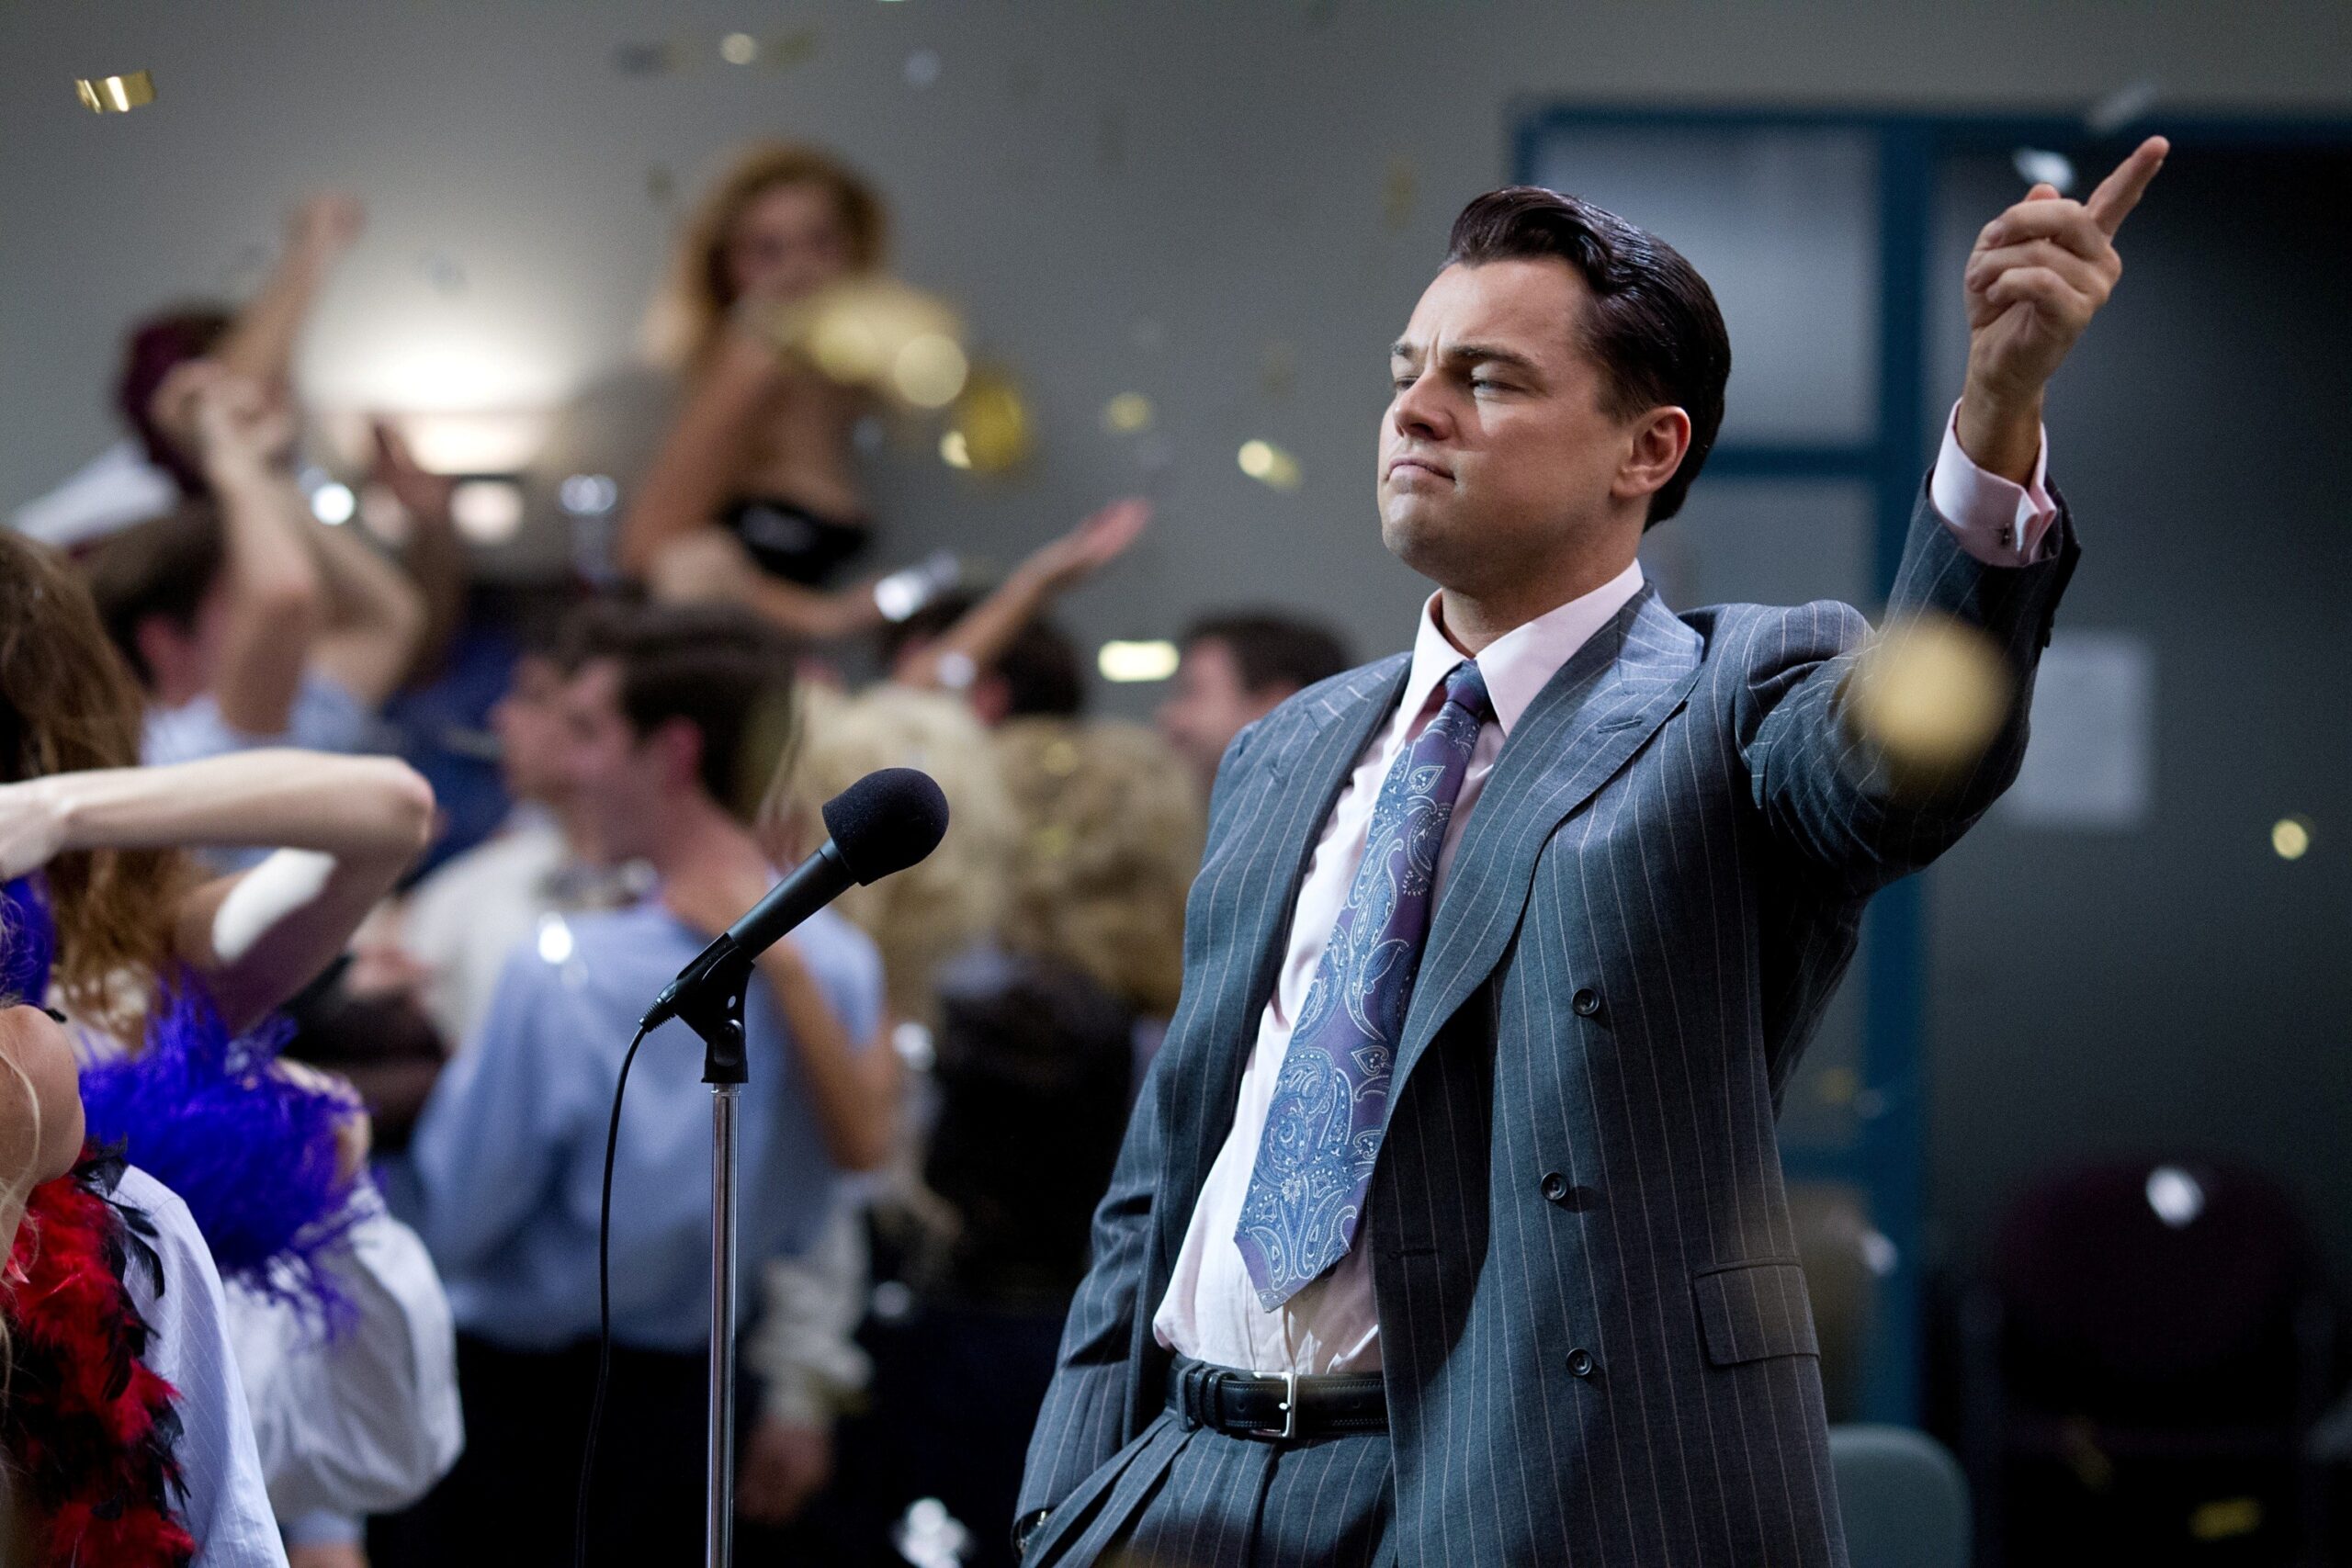 311816 3072x2048 desktop hd the wolf of wall street background scaled